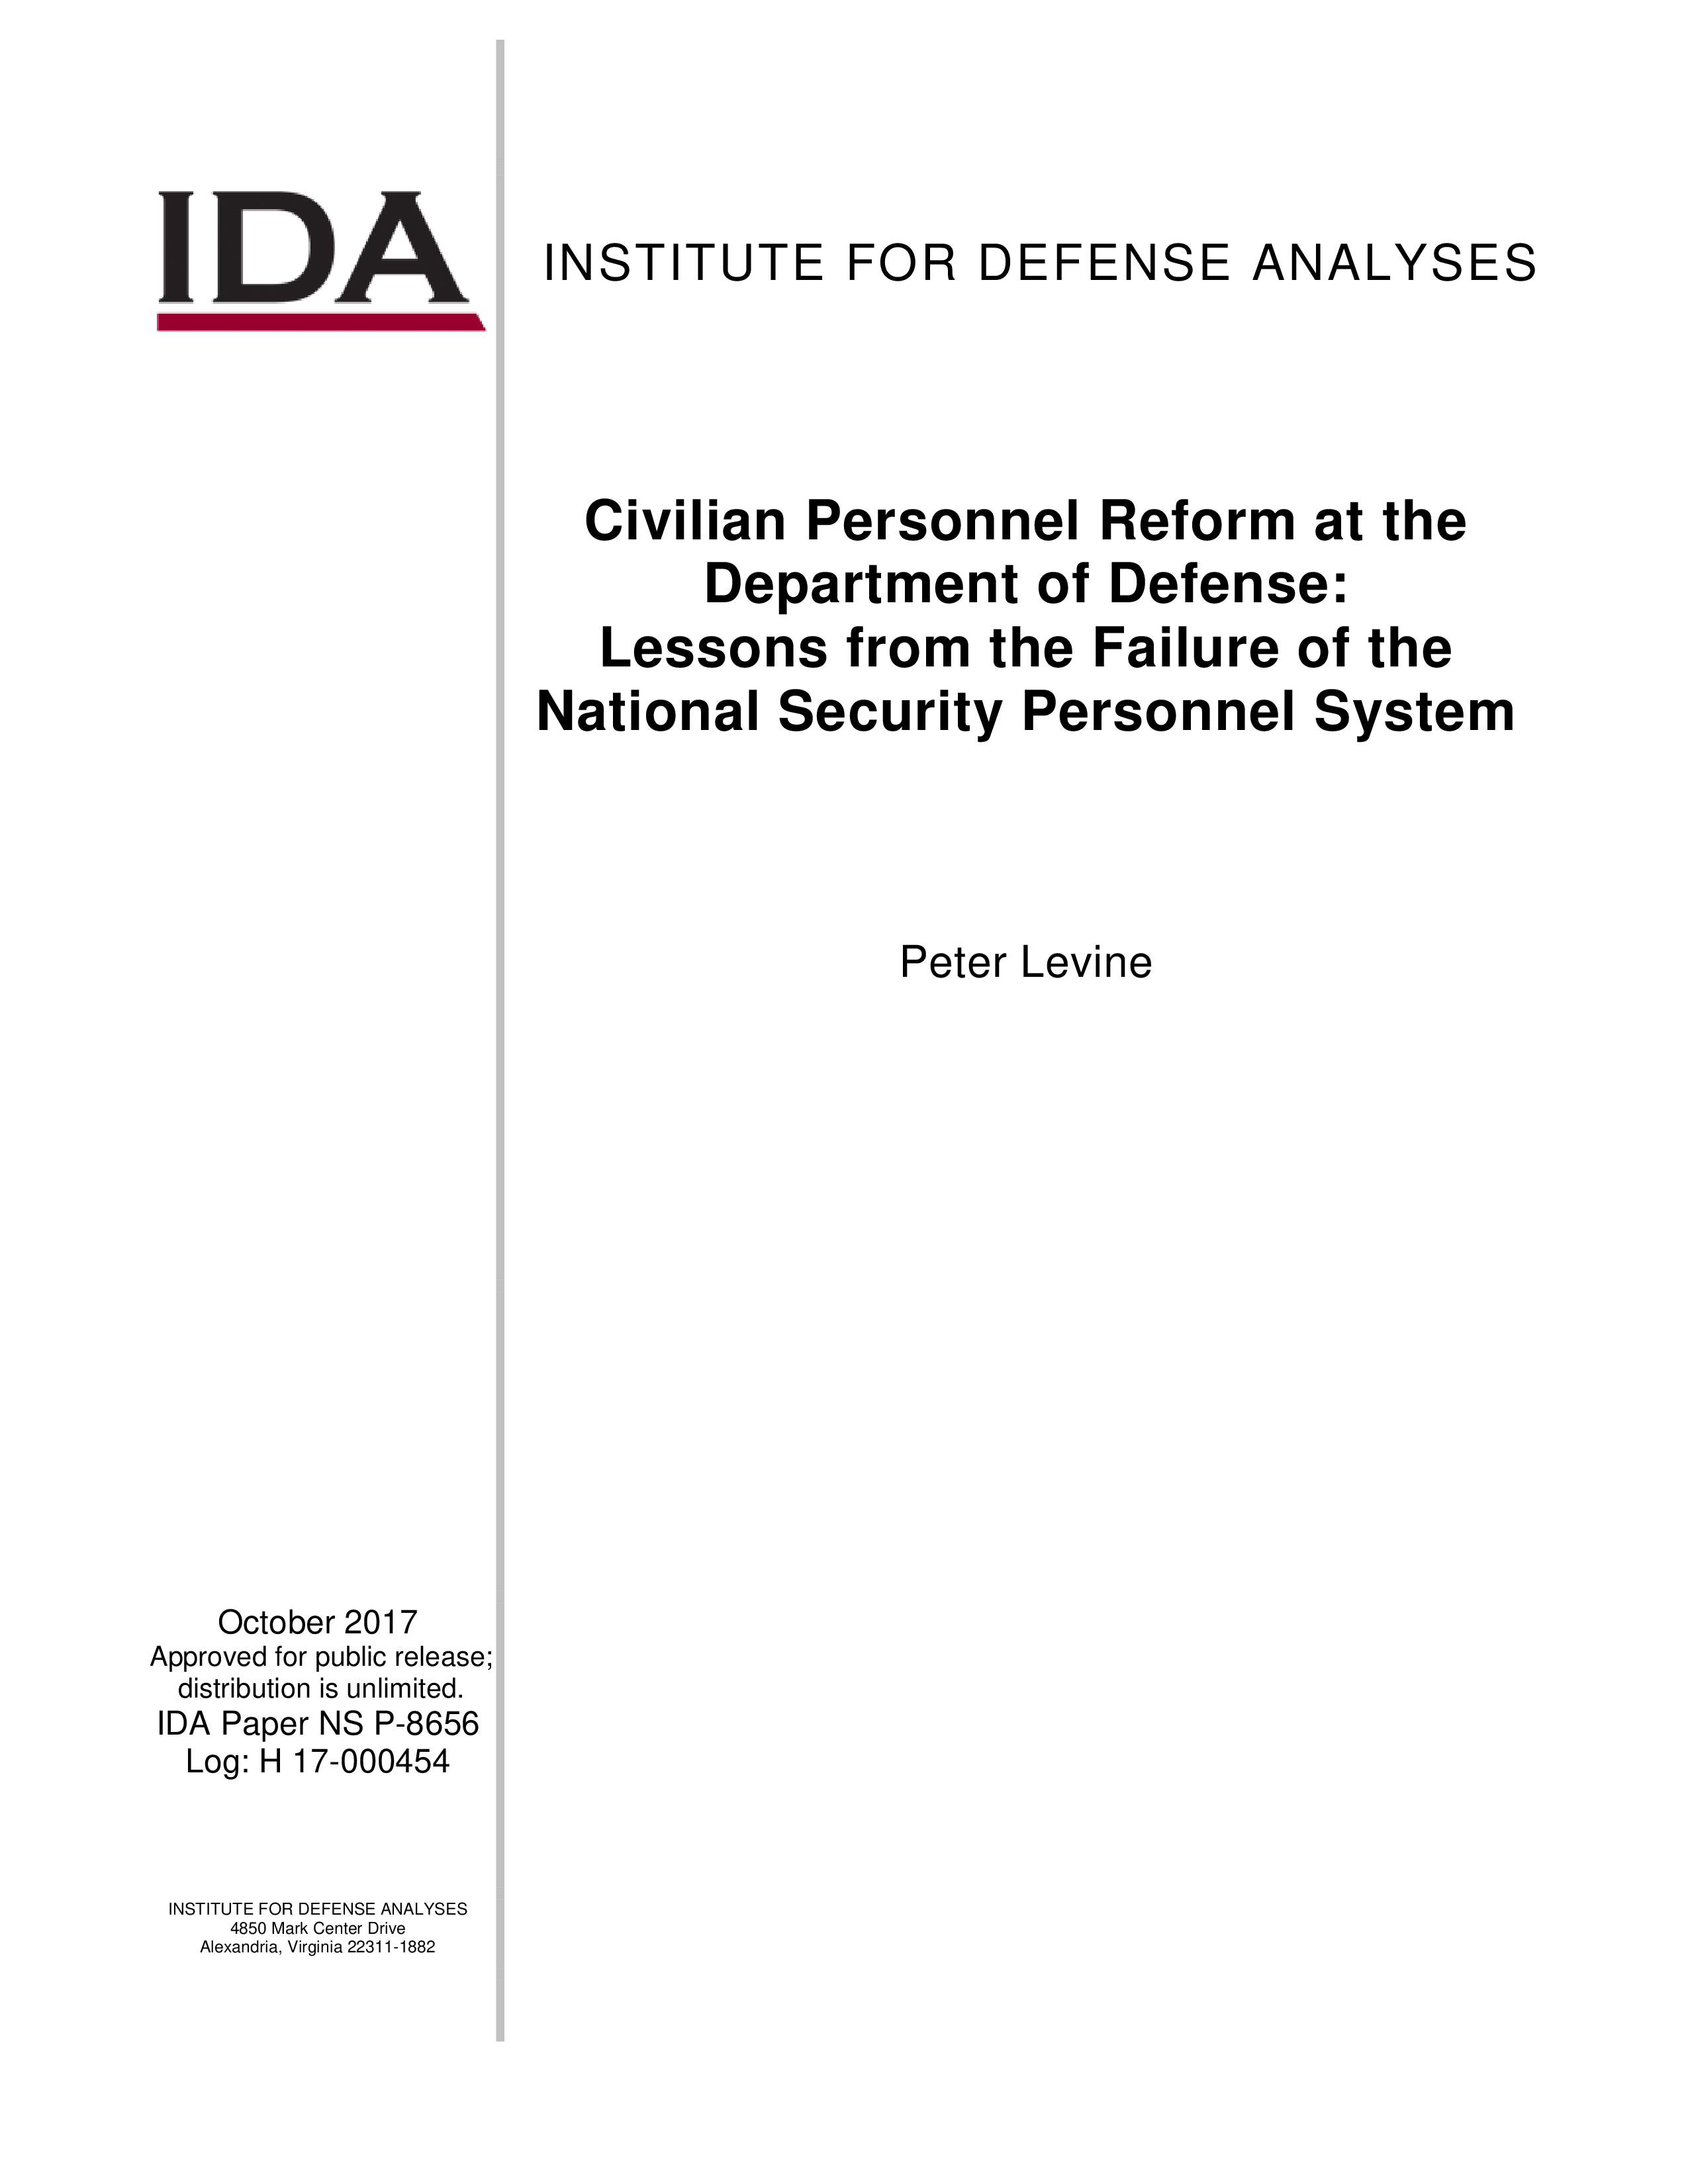 Civilian Personnel Reform at the Department of Defense: Lessons from the Failure of the National Security Personnel System